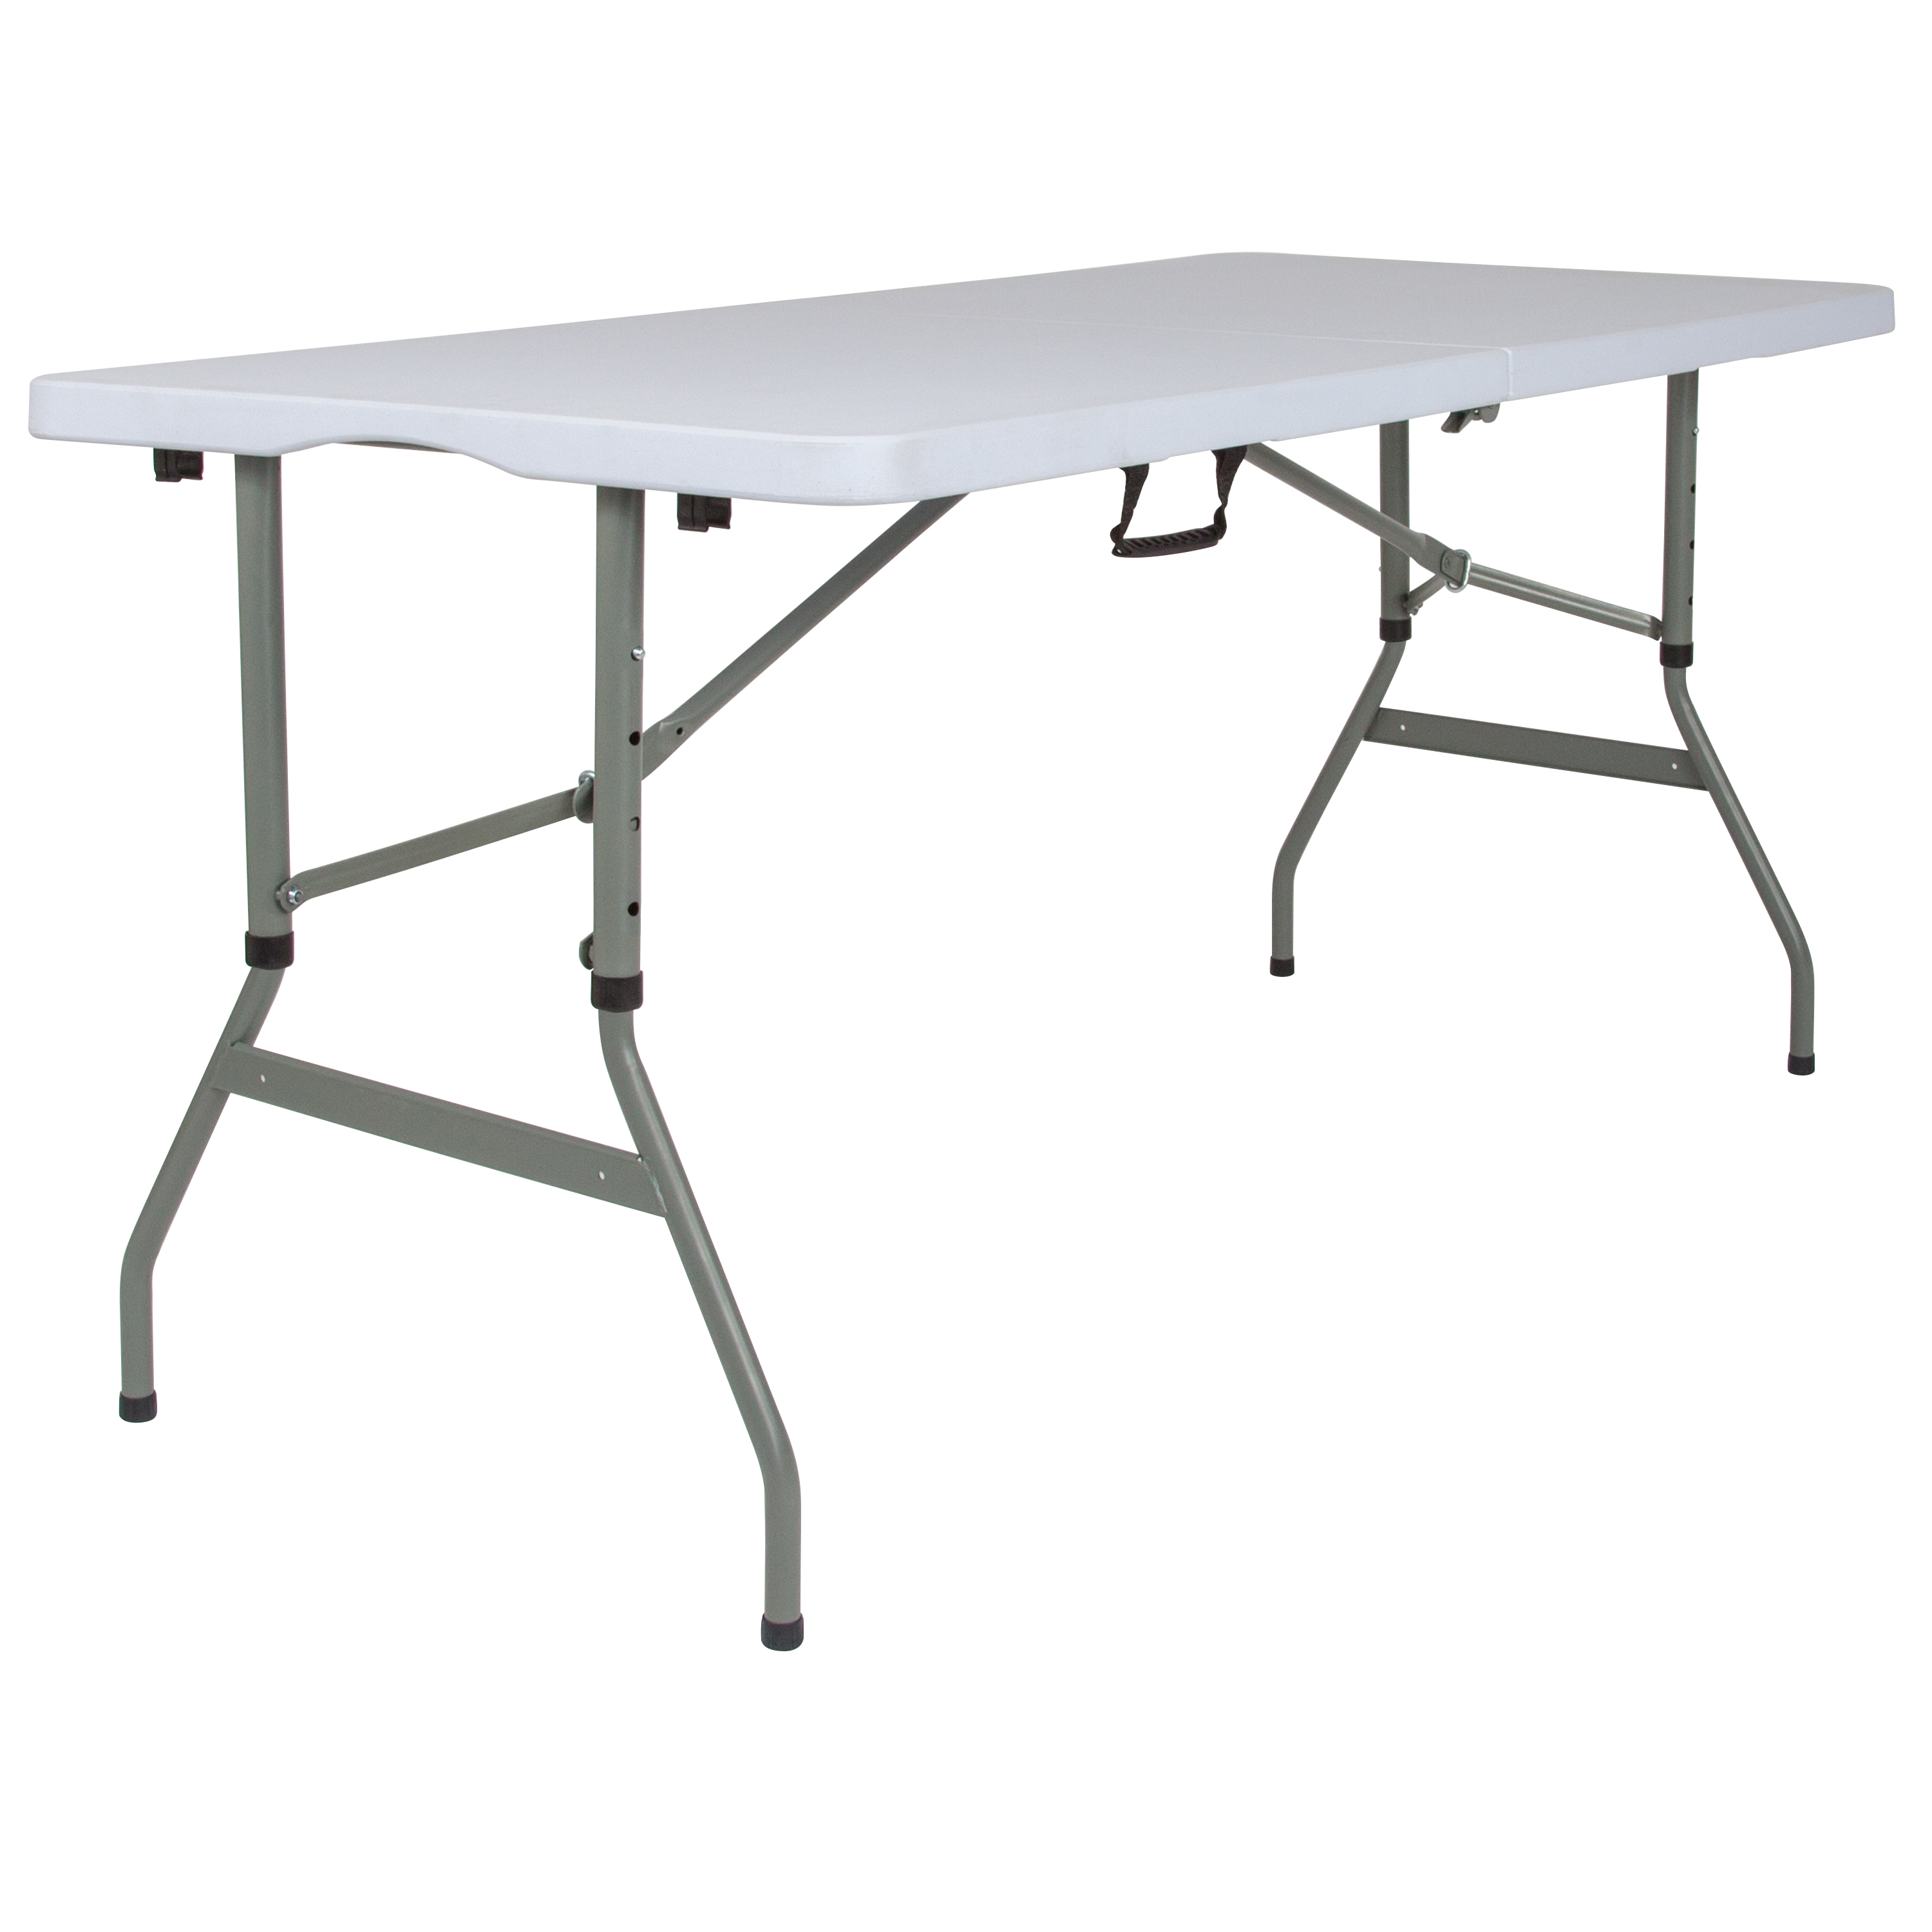 Flash Furniture RB-3050FH-ADJ-GG 5' Height Adjustable Bi-Fold Granite White Plastic Banquet Folding Table with Carry Handle